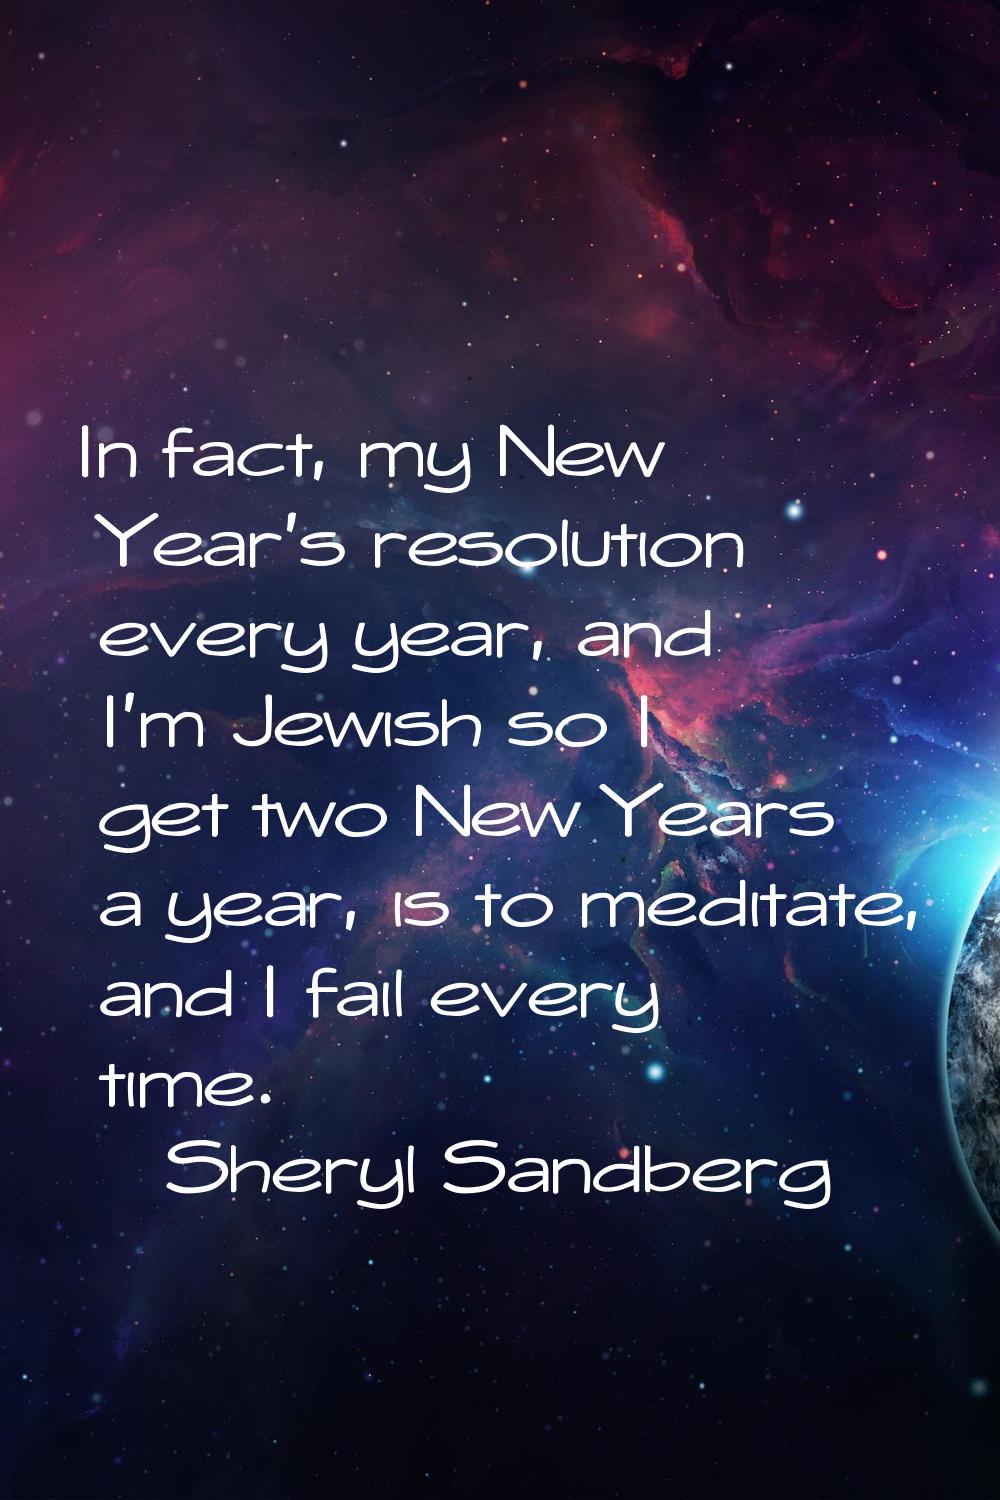 In fact, my New Year's resolution every year, and I'm Jewish so I get two New Years a year, is to m